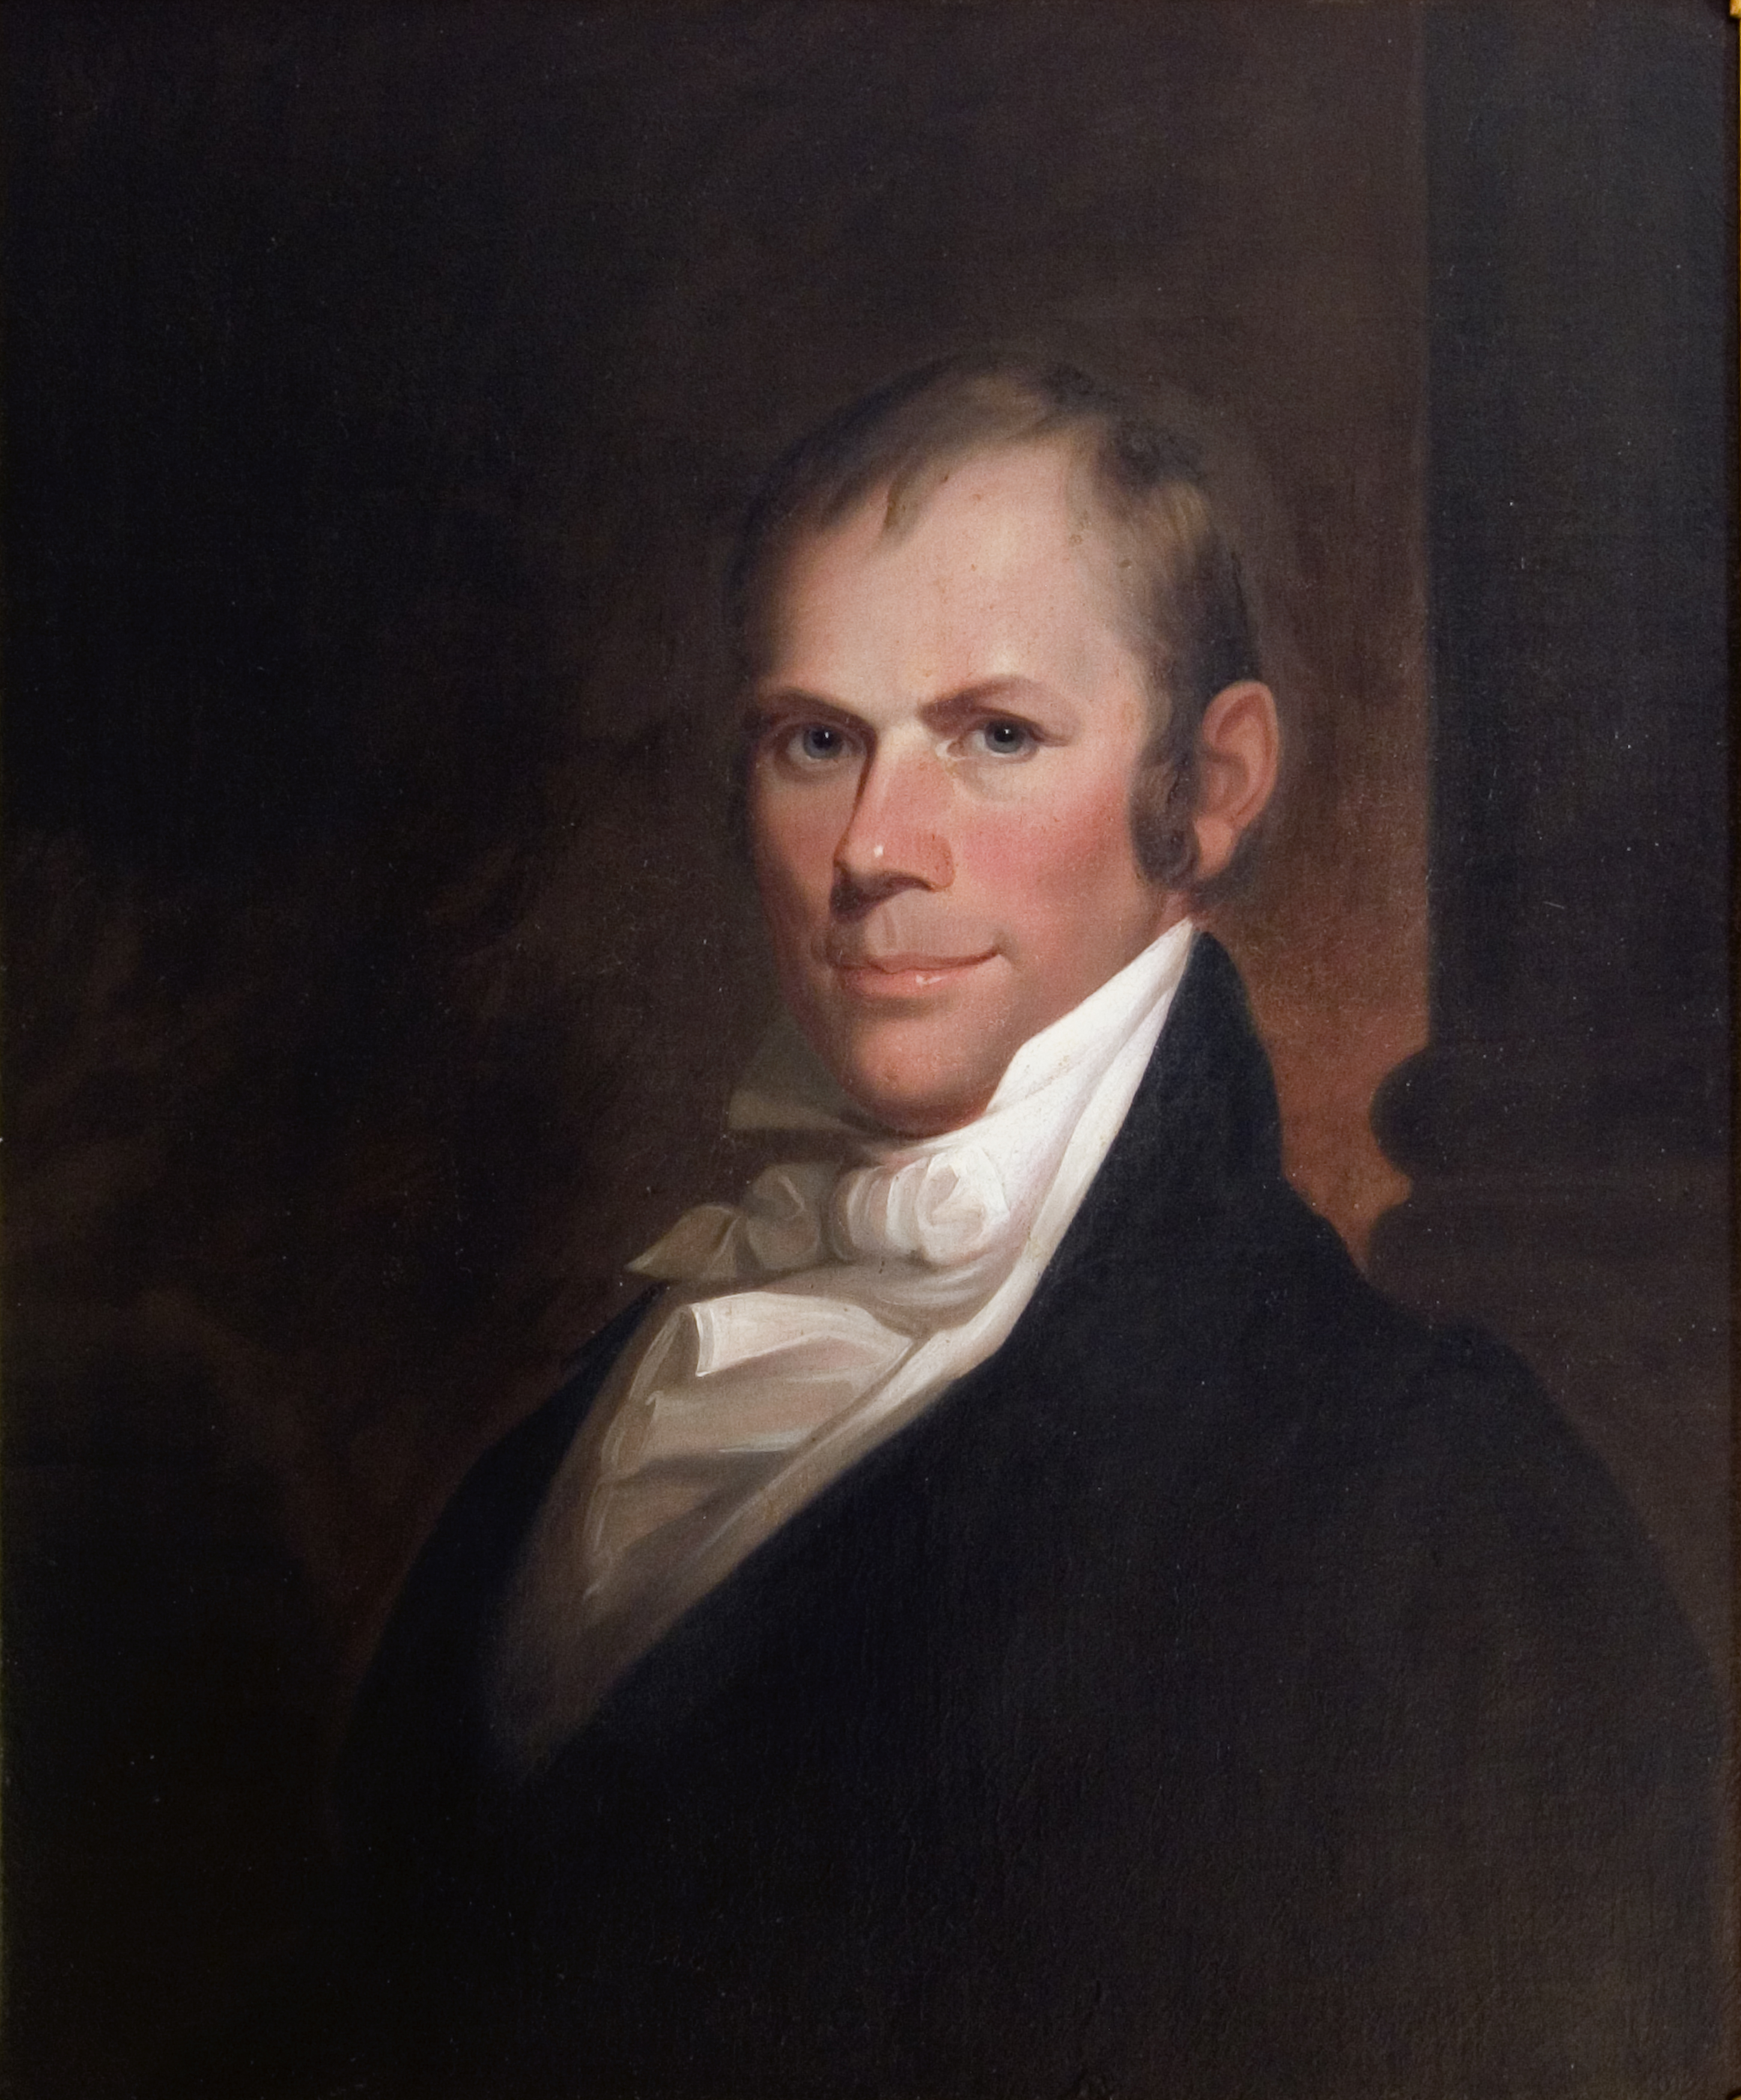 Henry Clay, 1818